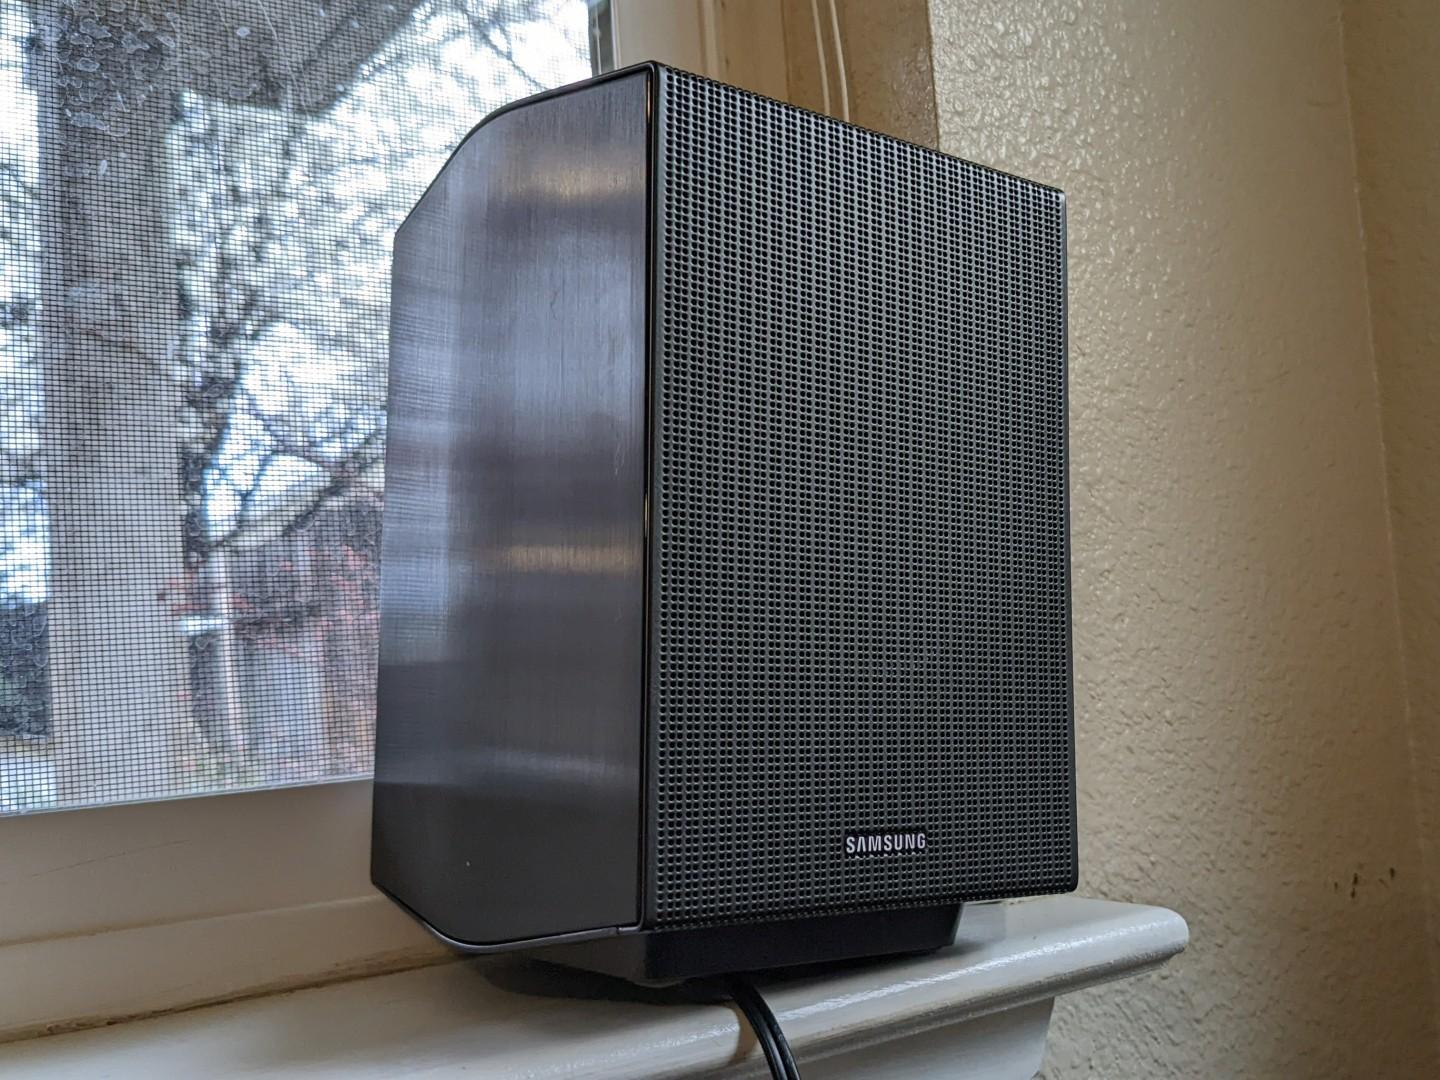 The Samsung HW-Q990C surround sound speaker shines in the light on the ledge of a window